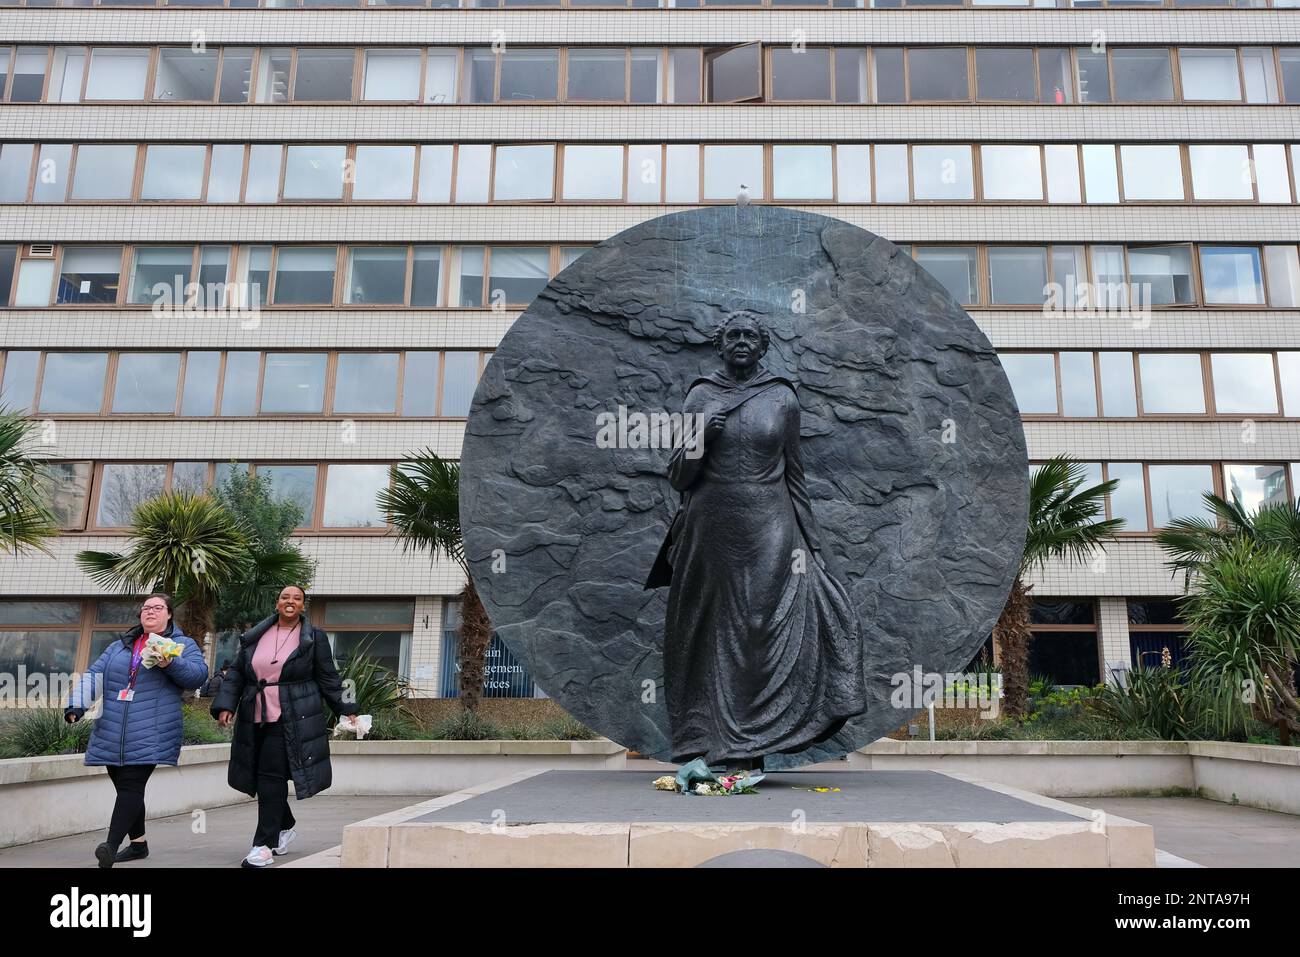 London, UK. Memorial statue for British-Jamaican Mary Seacole who nursed during the Crimean War, situated in the grounds of St Thomas' Hospital. Stock Photo